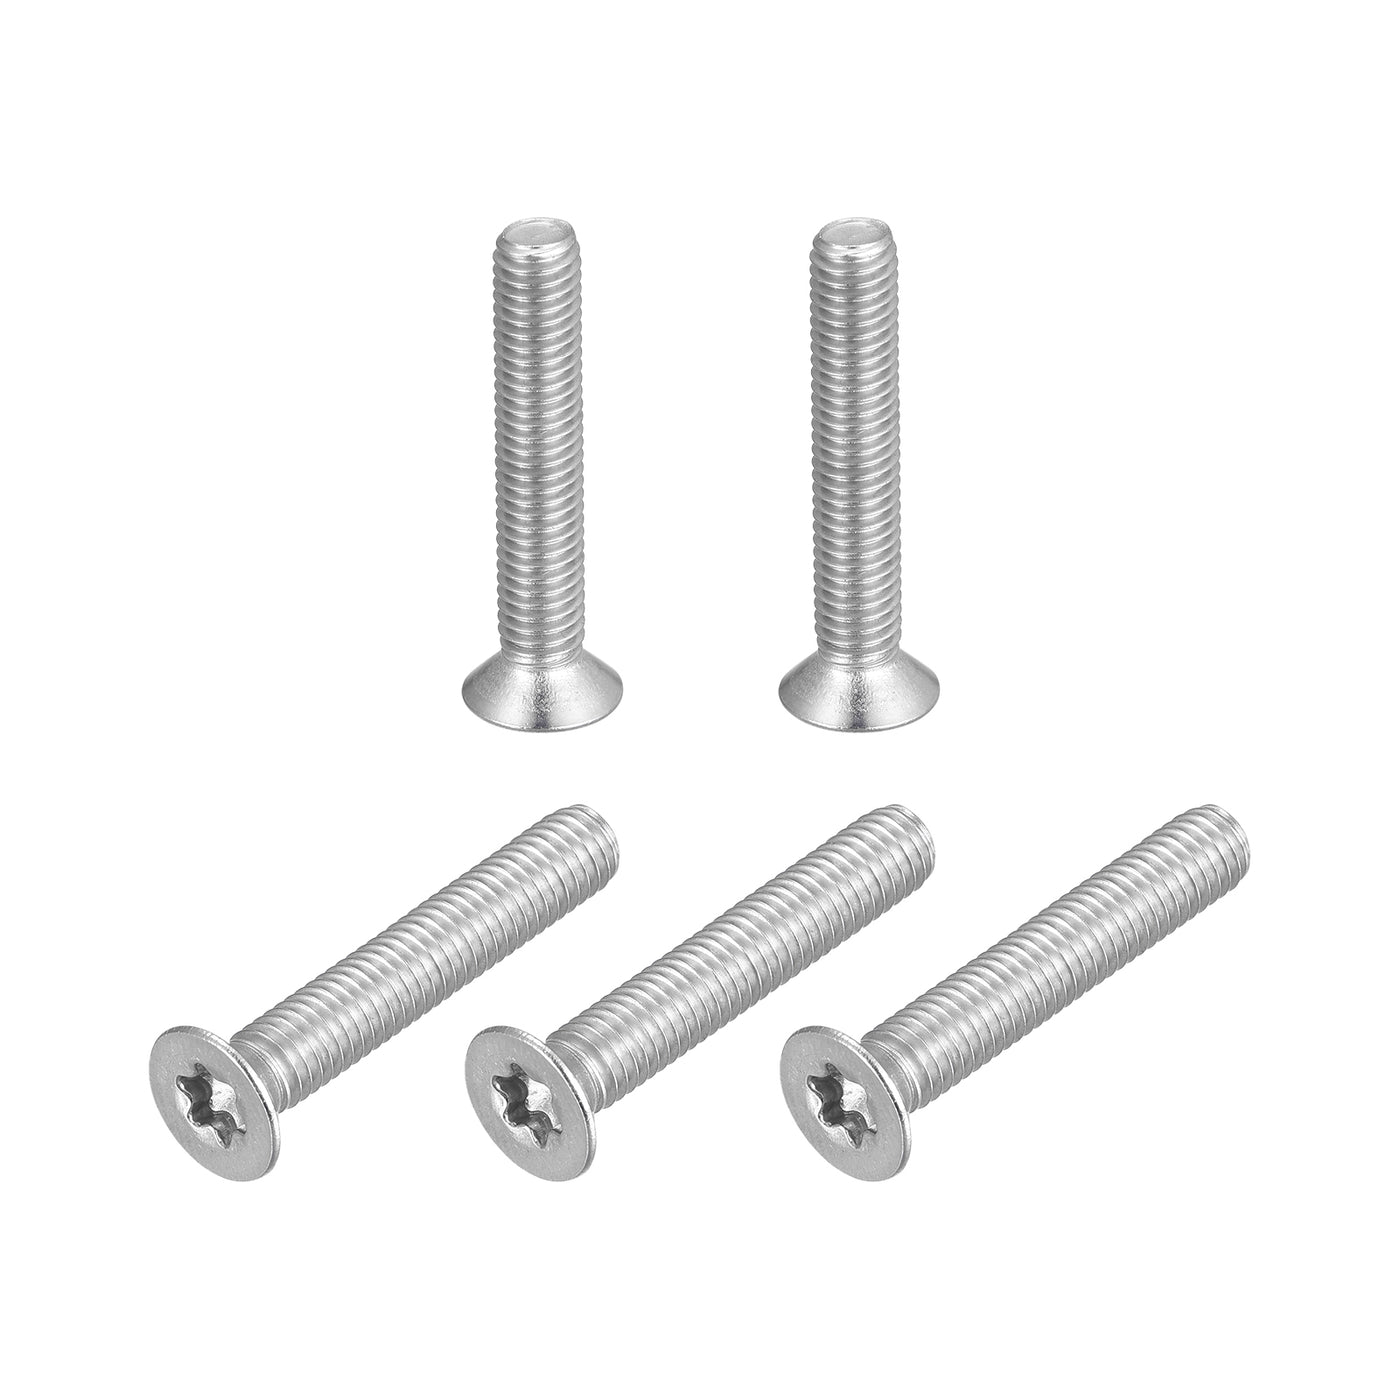 uxcell Uxcell M5x30mm Torx Security Screws, 5pcs 316 Stainless Steel Countersunk Head Screw